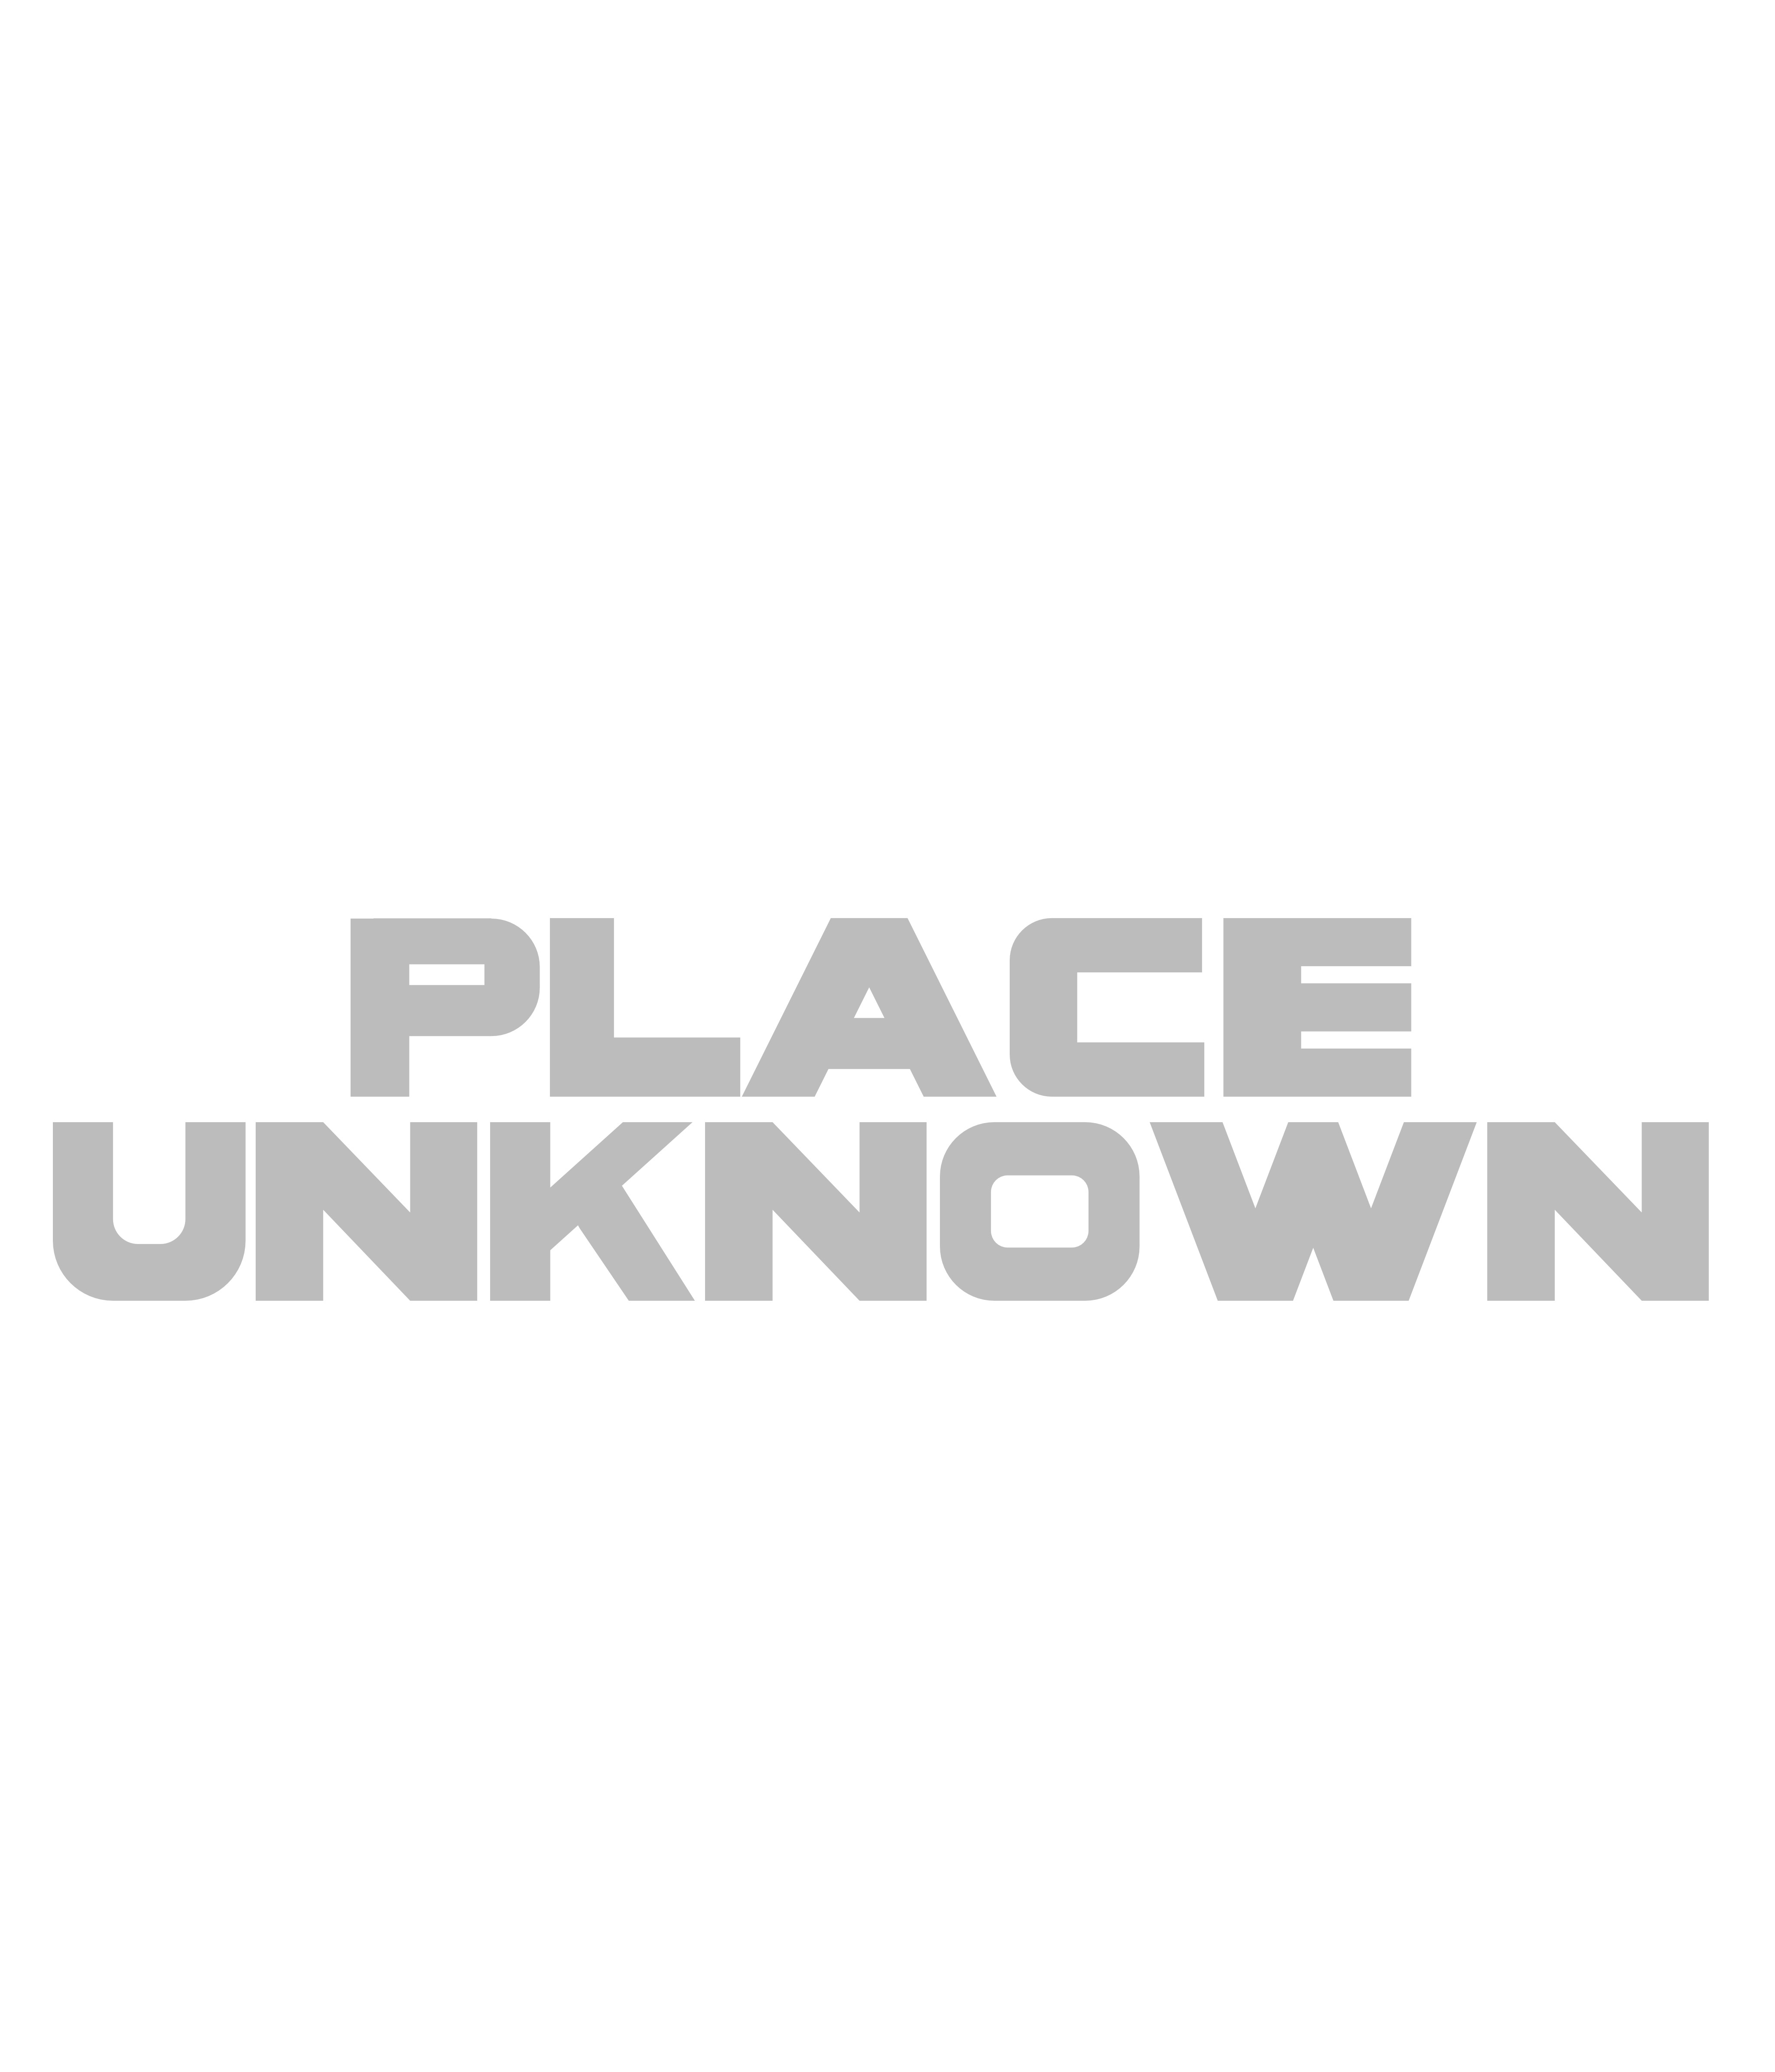 Unknown is Live - YouTube